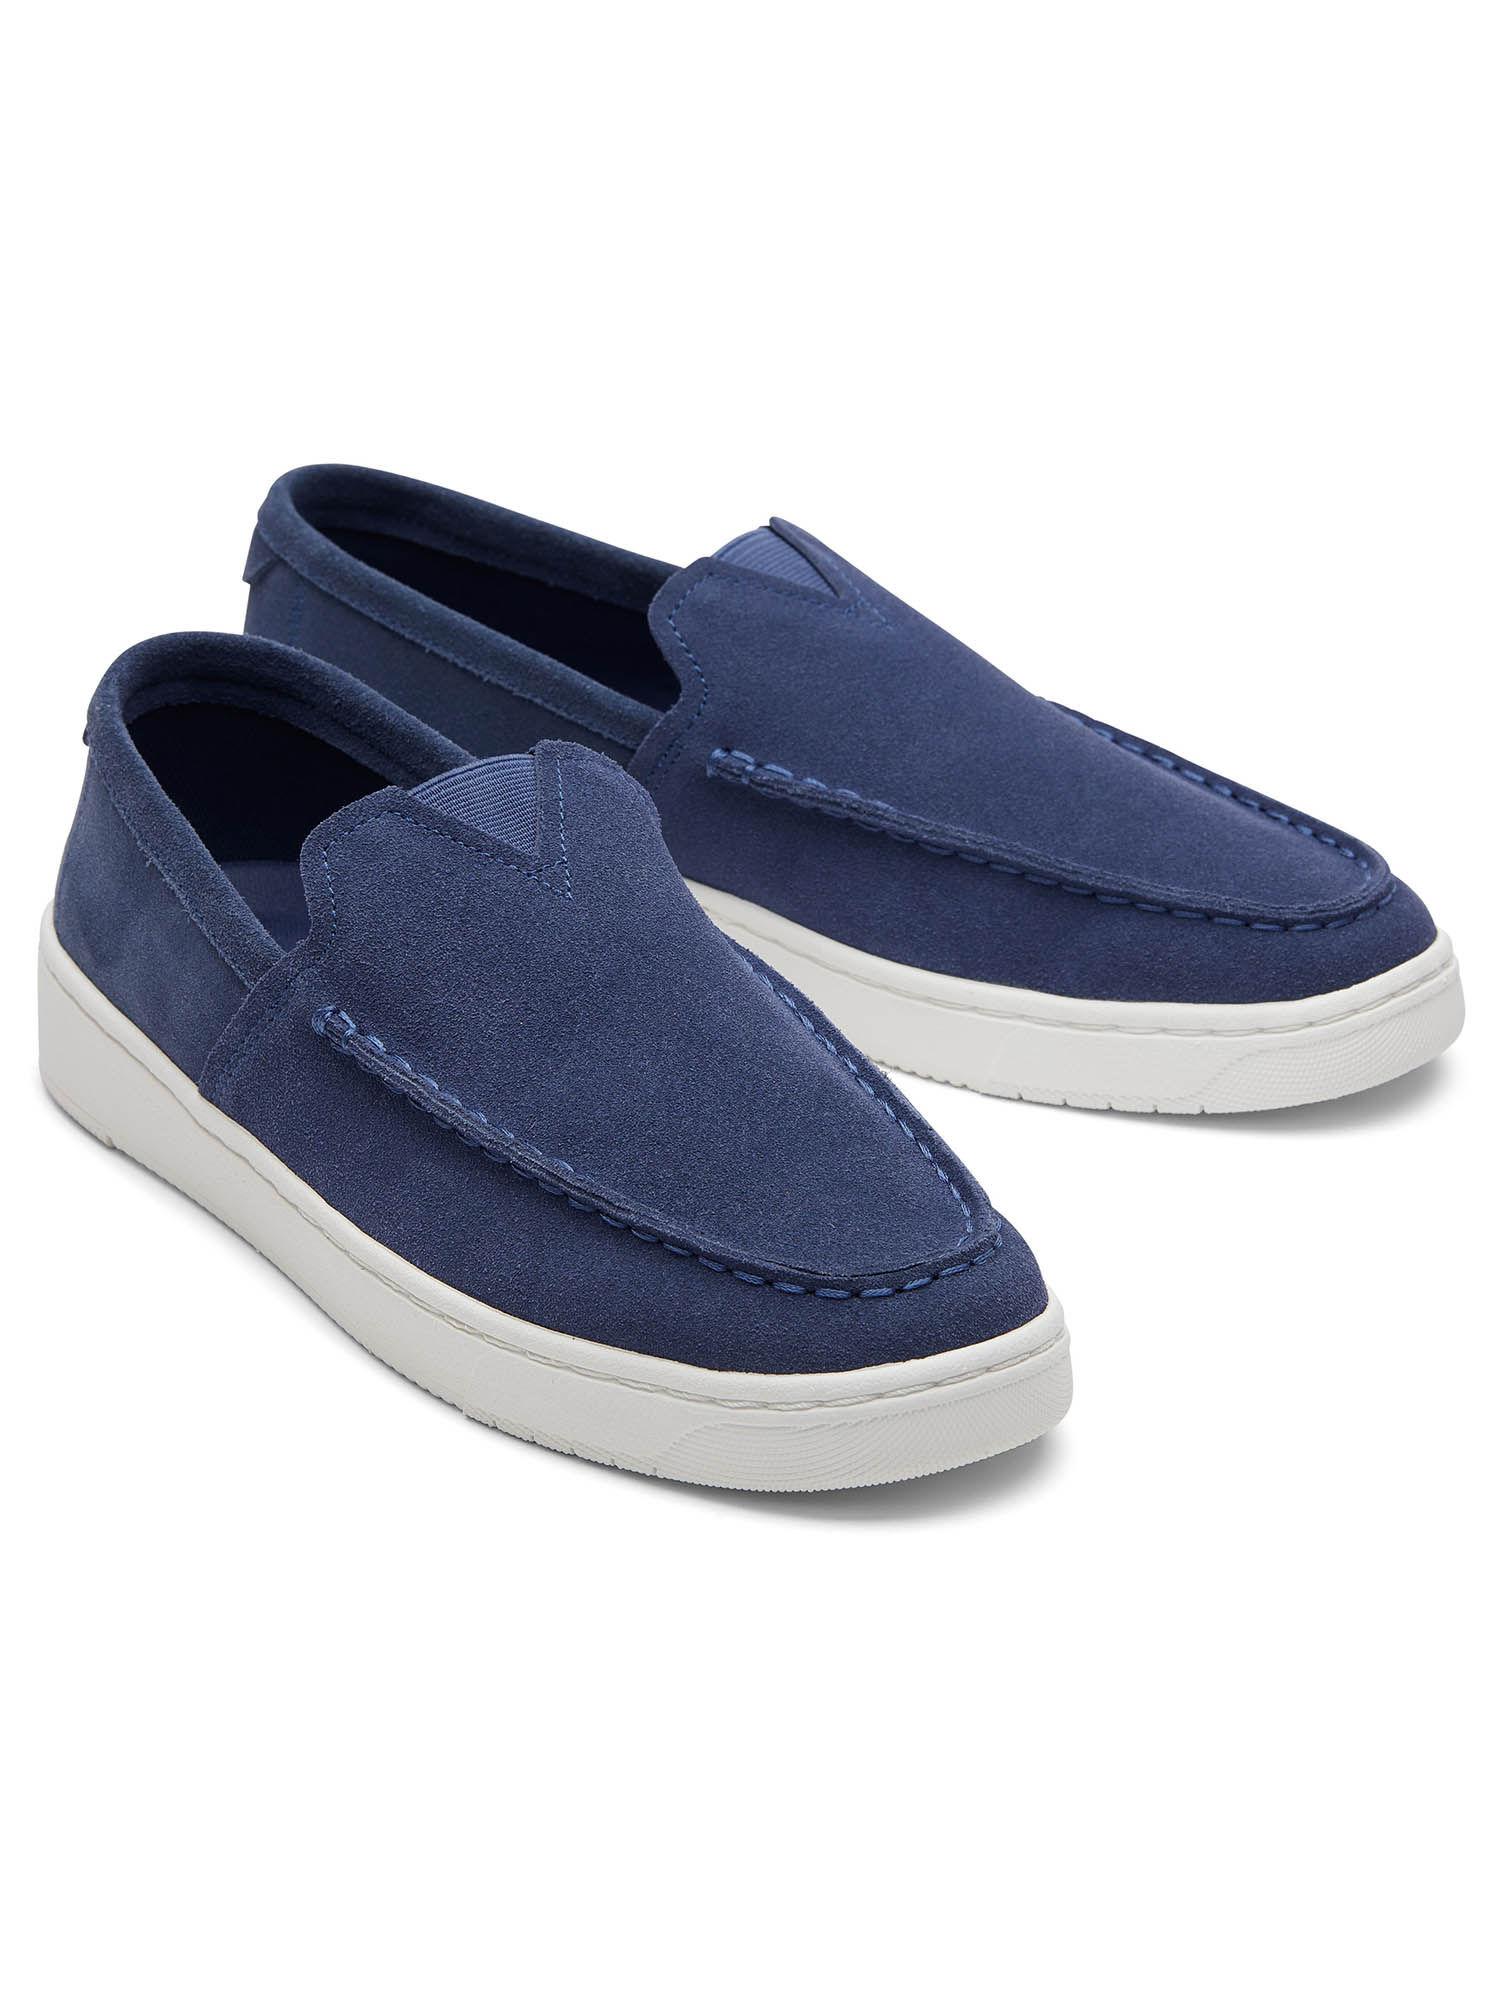 trvl lite suede navy loafers